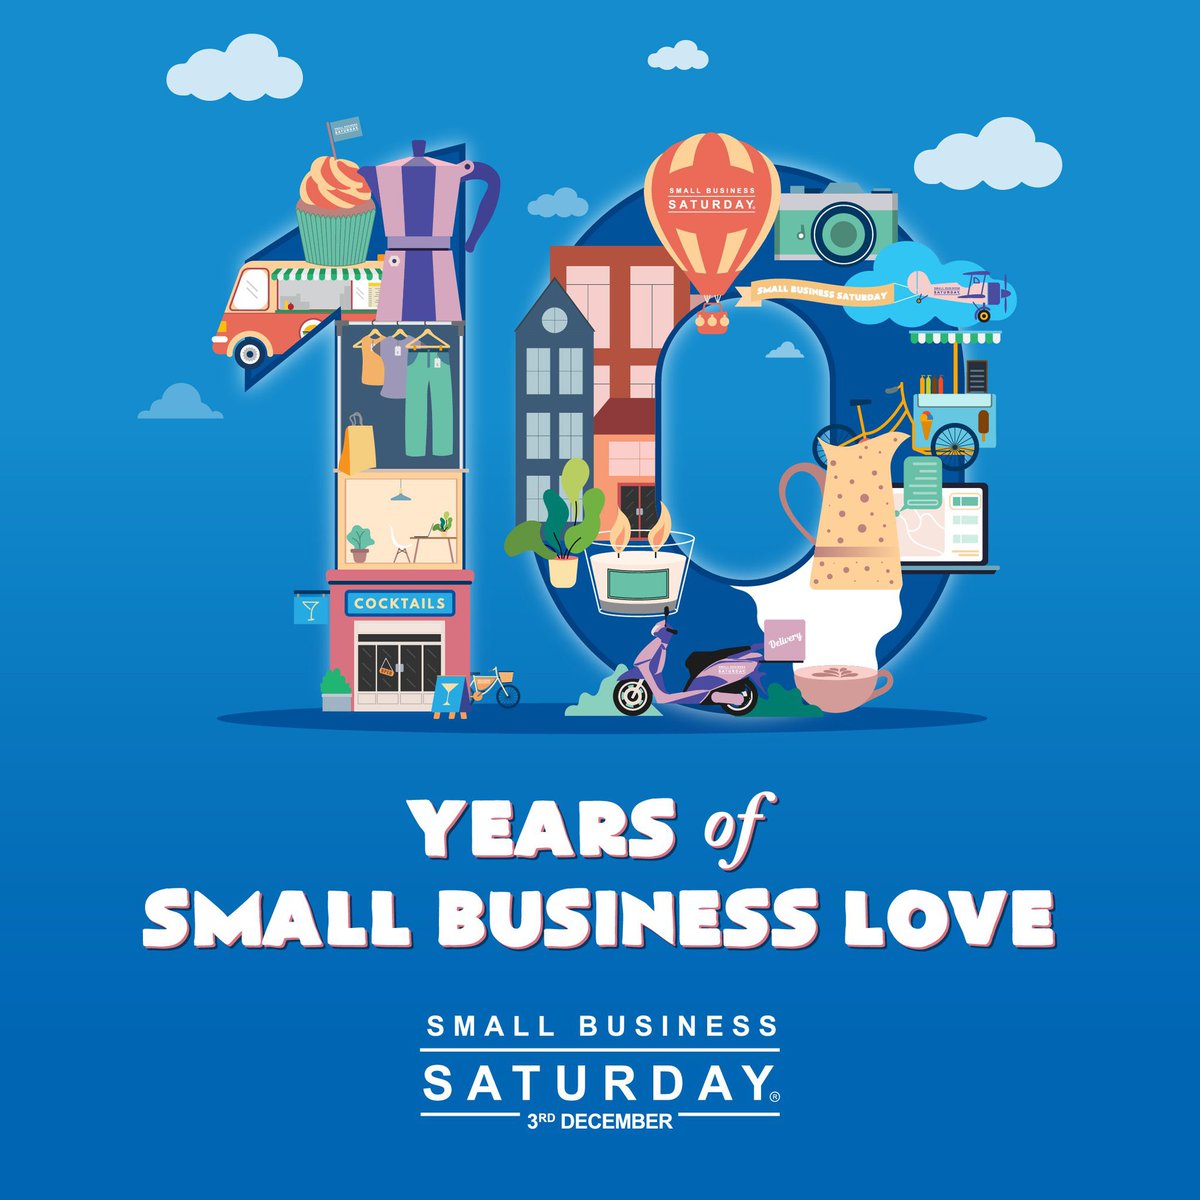 Today is #SmallBusinessSaturday. They make up the backbone of our communities so let’s make sure we all go out to support our local shops, pubs and businesses today and in the run-ip to Christmas!